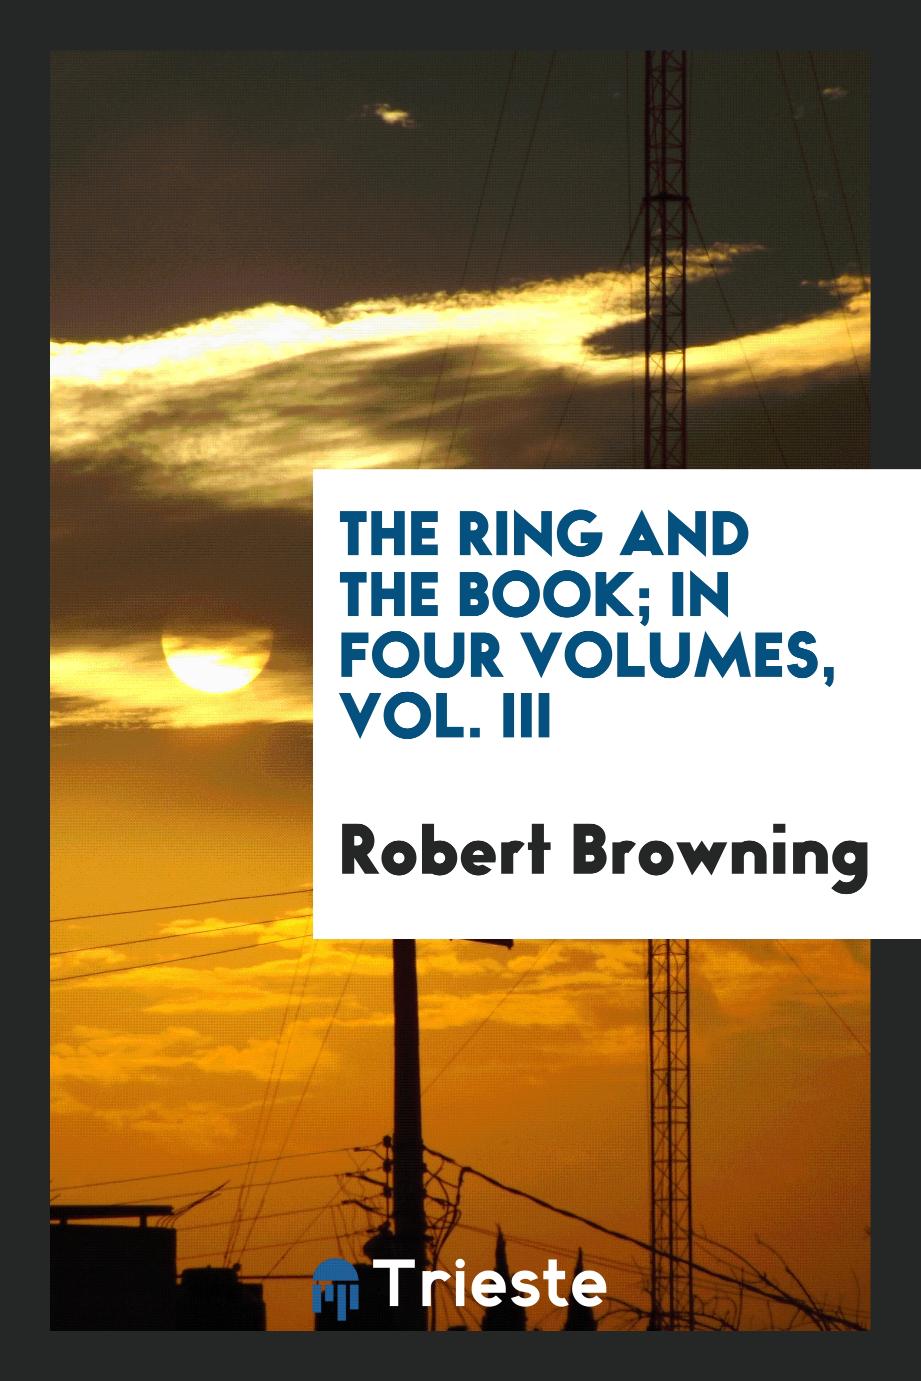 The ring and the book; in four volumes, Vol. III